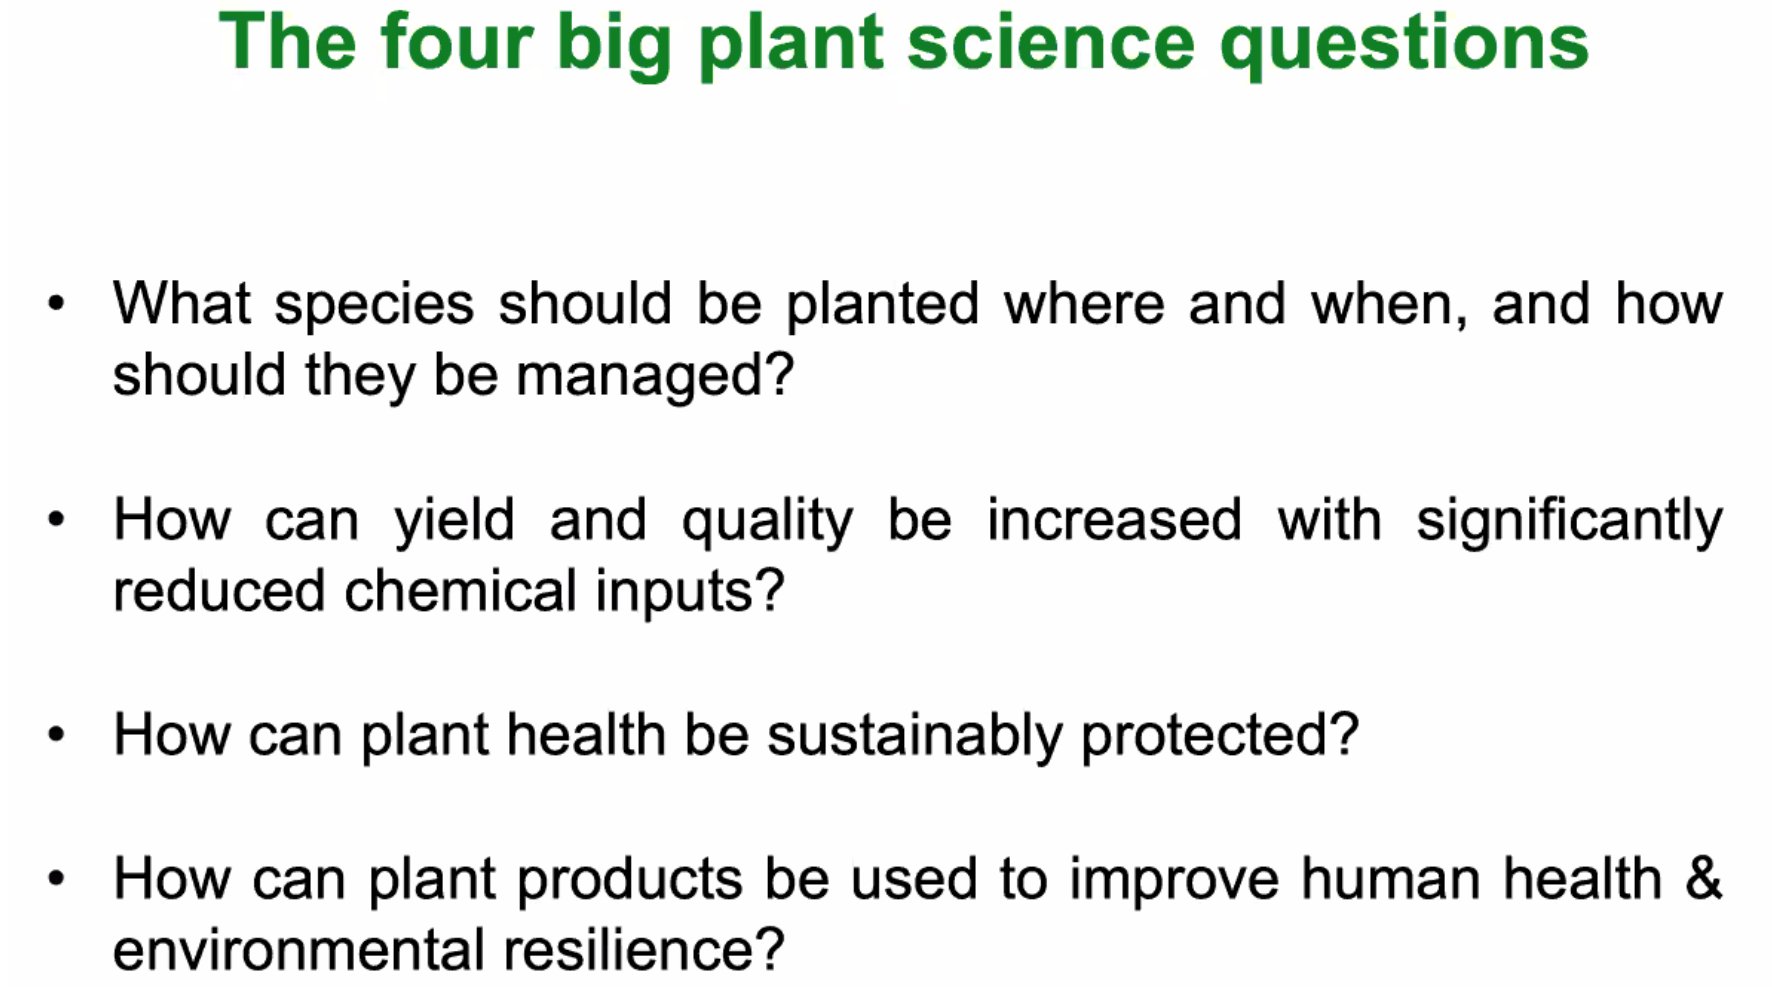 Weigel 🌱 aka WeigelWorld 🇺🇦 🇩🇪 🇺🇸 on Twitter: "@JaneLangdale asking four big questions for #plantsci at Annual Meeting in Experimental Plant Sciences. I'd add "How can plant science help